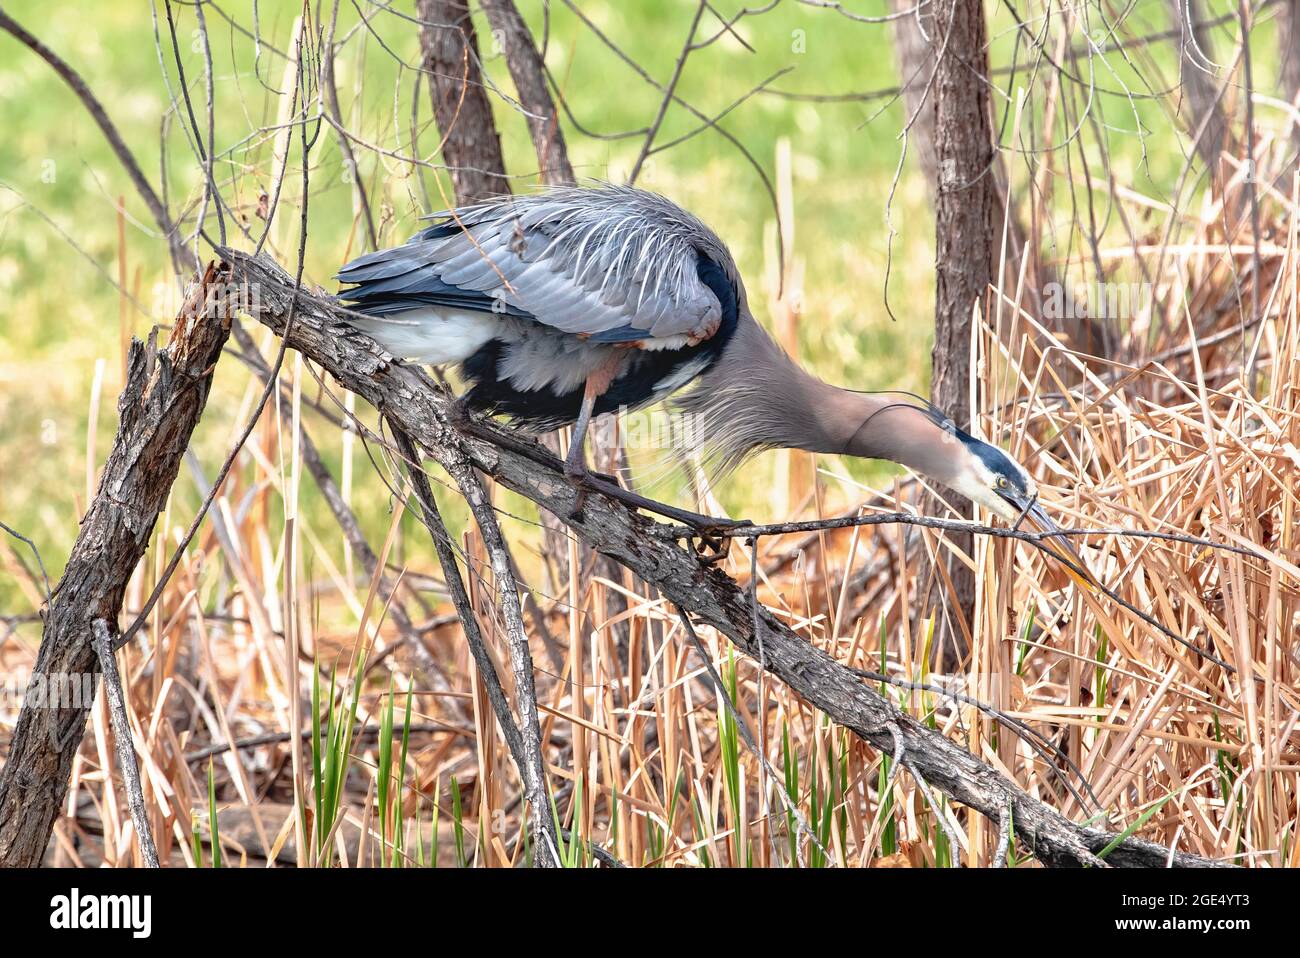 A Great Blue Heron in an unusual position on a broken branch, attempting to break off a twig for nest building purposes in early Springtime. Stock Photo